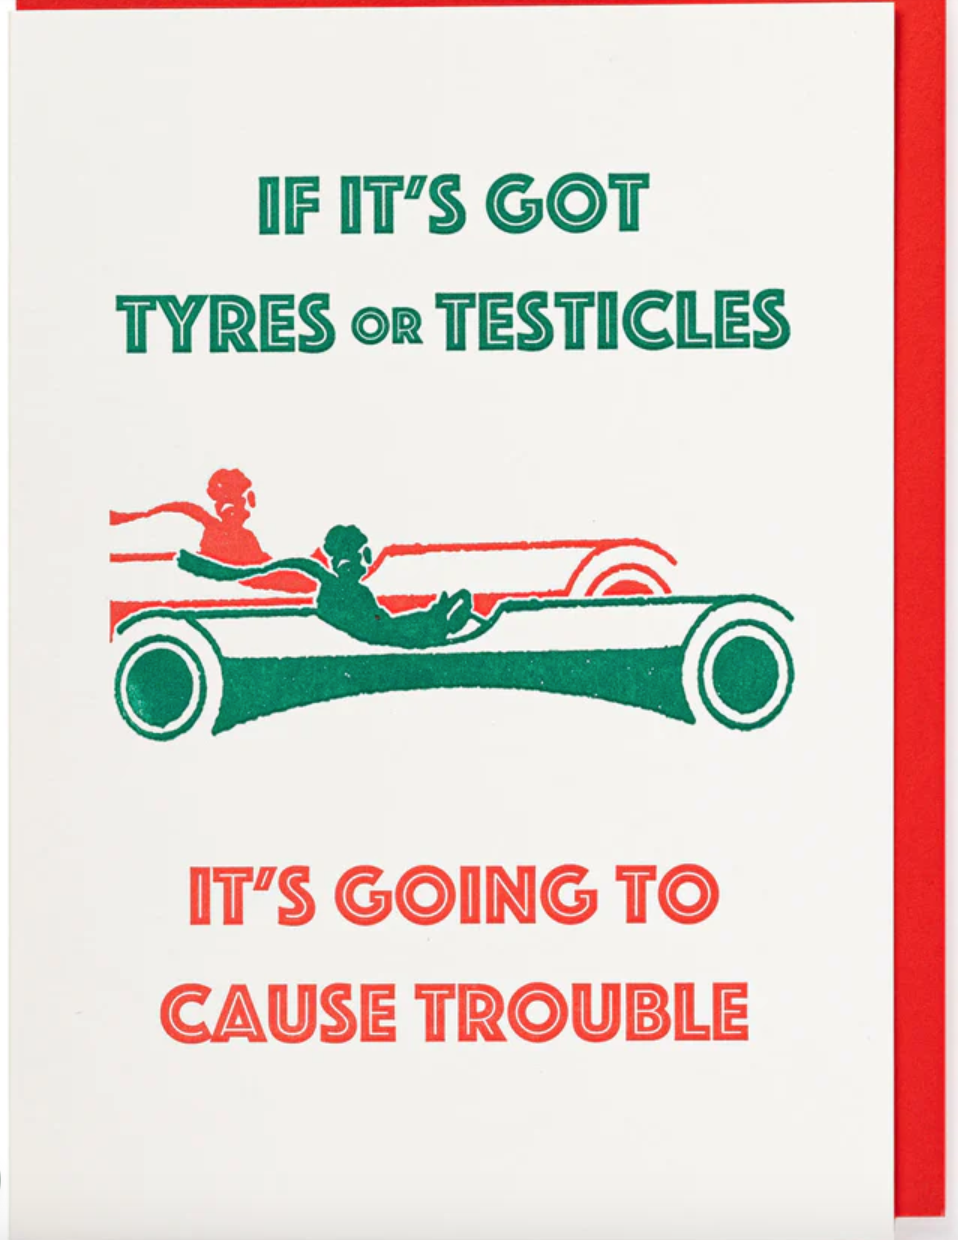 Tyres or Testicles Card